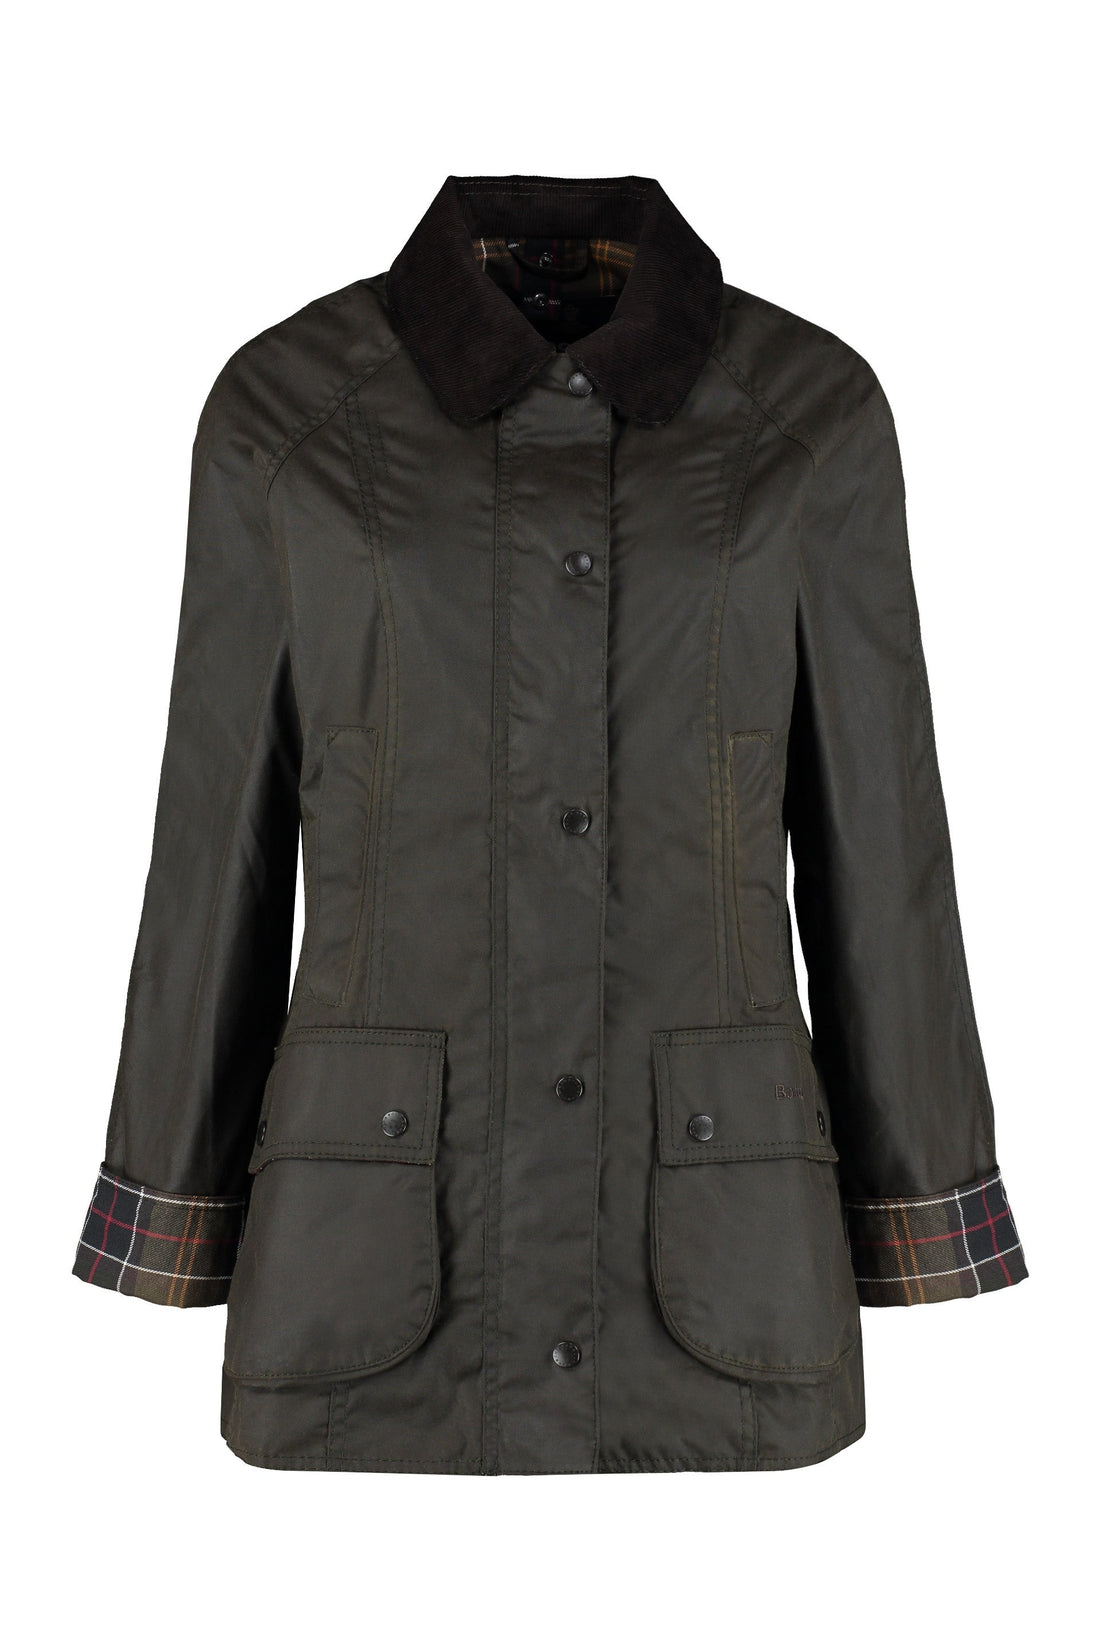 Barbour-OUTLET-SALE-Beadnell coated cotton jacket-ARCHIVIST